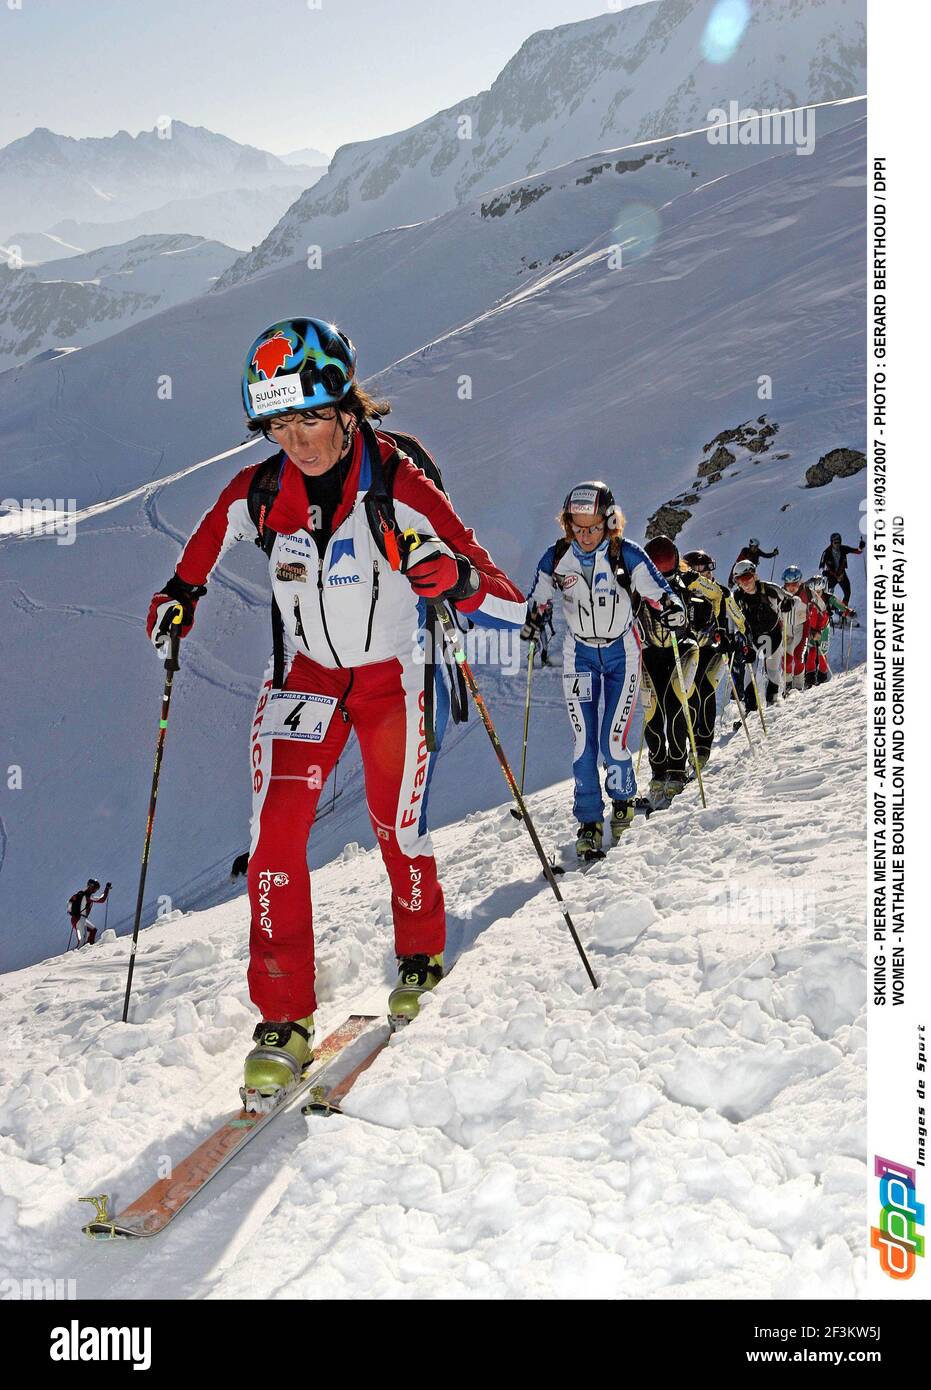 SKIING - PIERRA MENTA 2007 - ARECHES BEAUFORT (FRA) - 15 TO 18/03/2007 -  PHOTO : GERARD BERTHOUD / DPPI WOMEN - NATHALIE BOURILLON AND CORINNE FAVRE  (FRA) / 2ND Stock Photo - Alamy